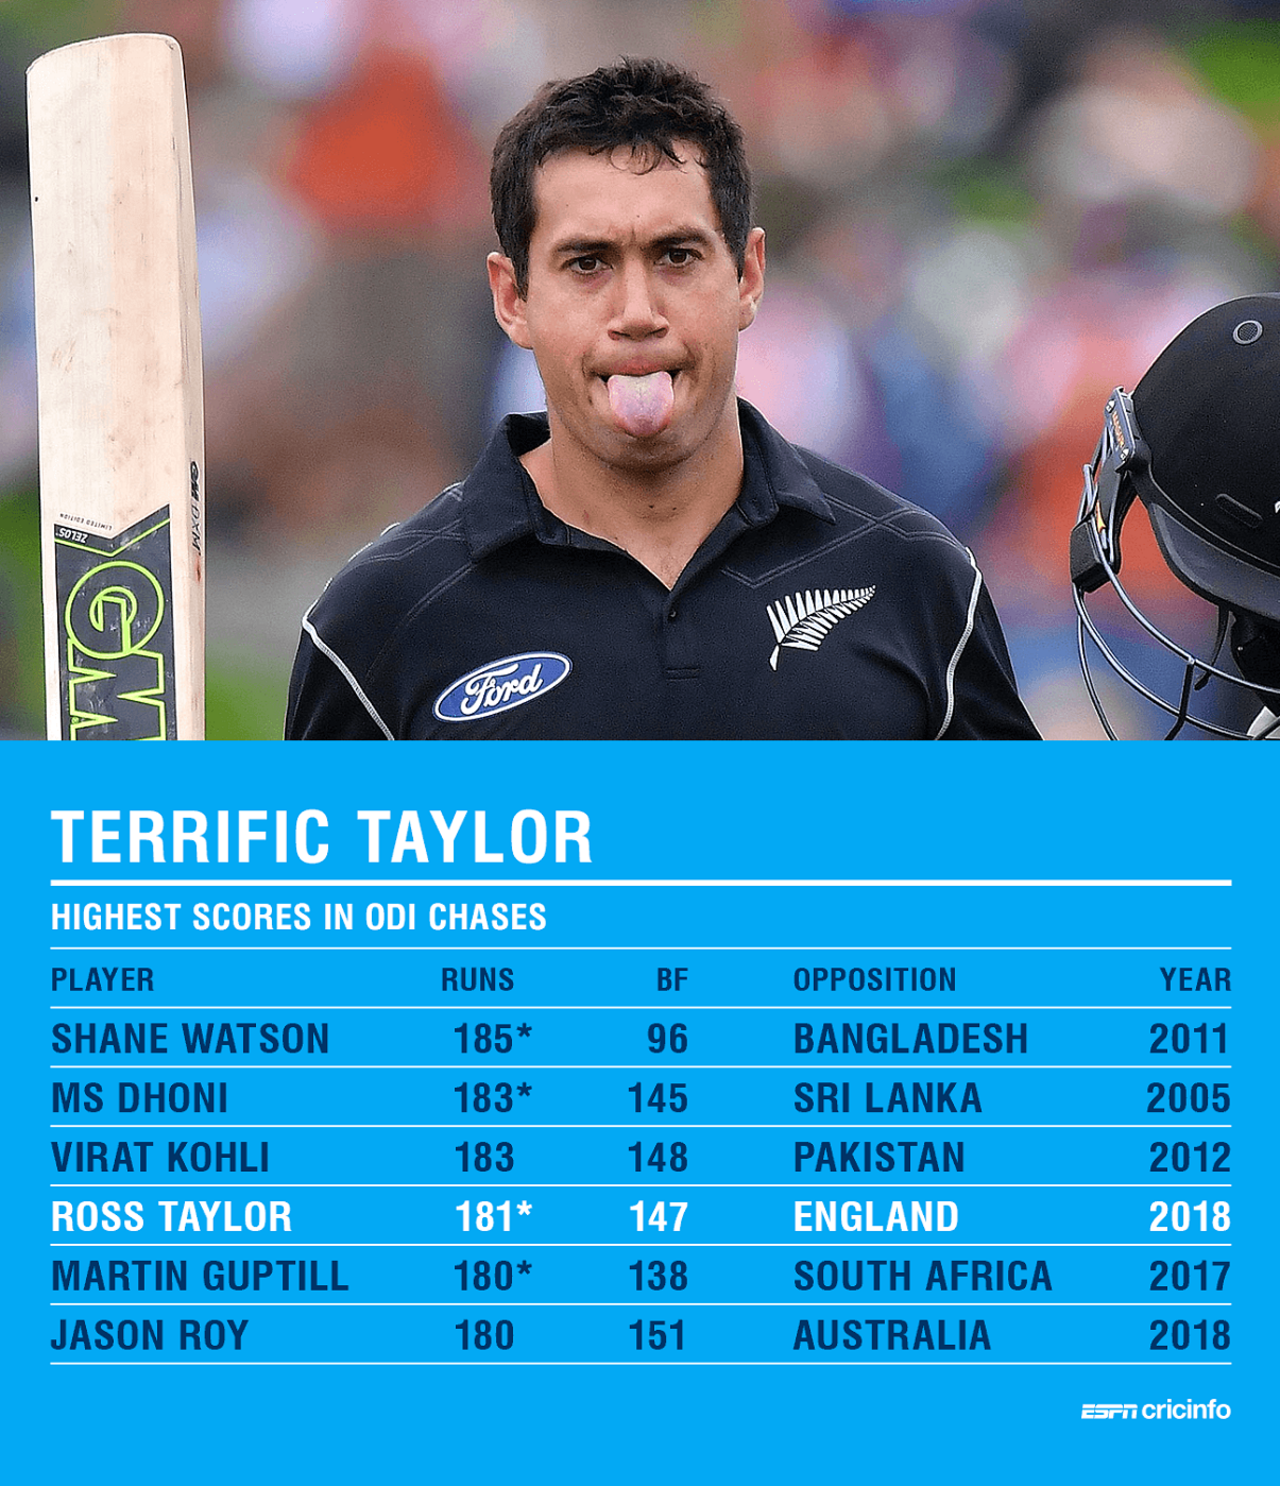 Ross Taylor's career-best is now the fourth-highest score in an ODI chase